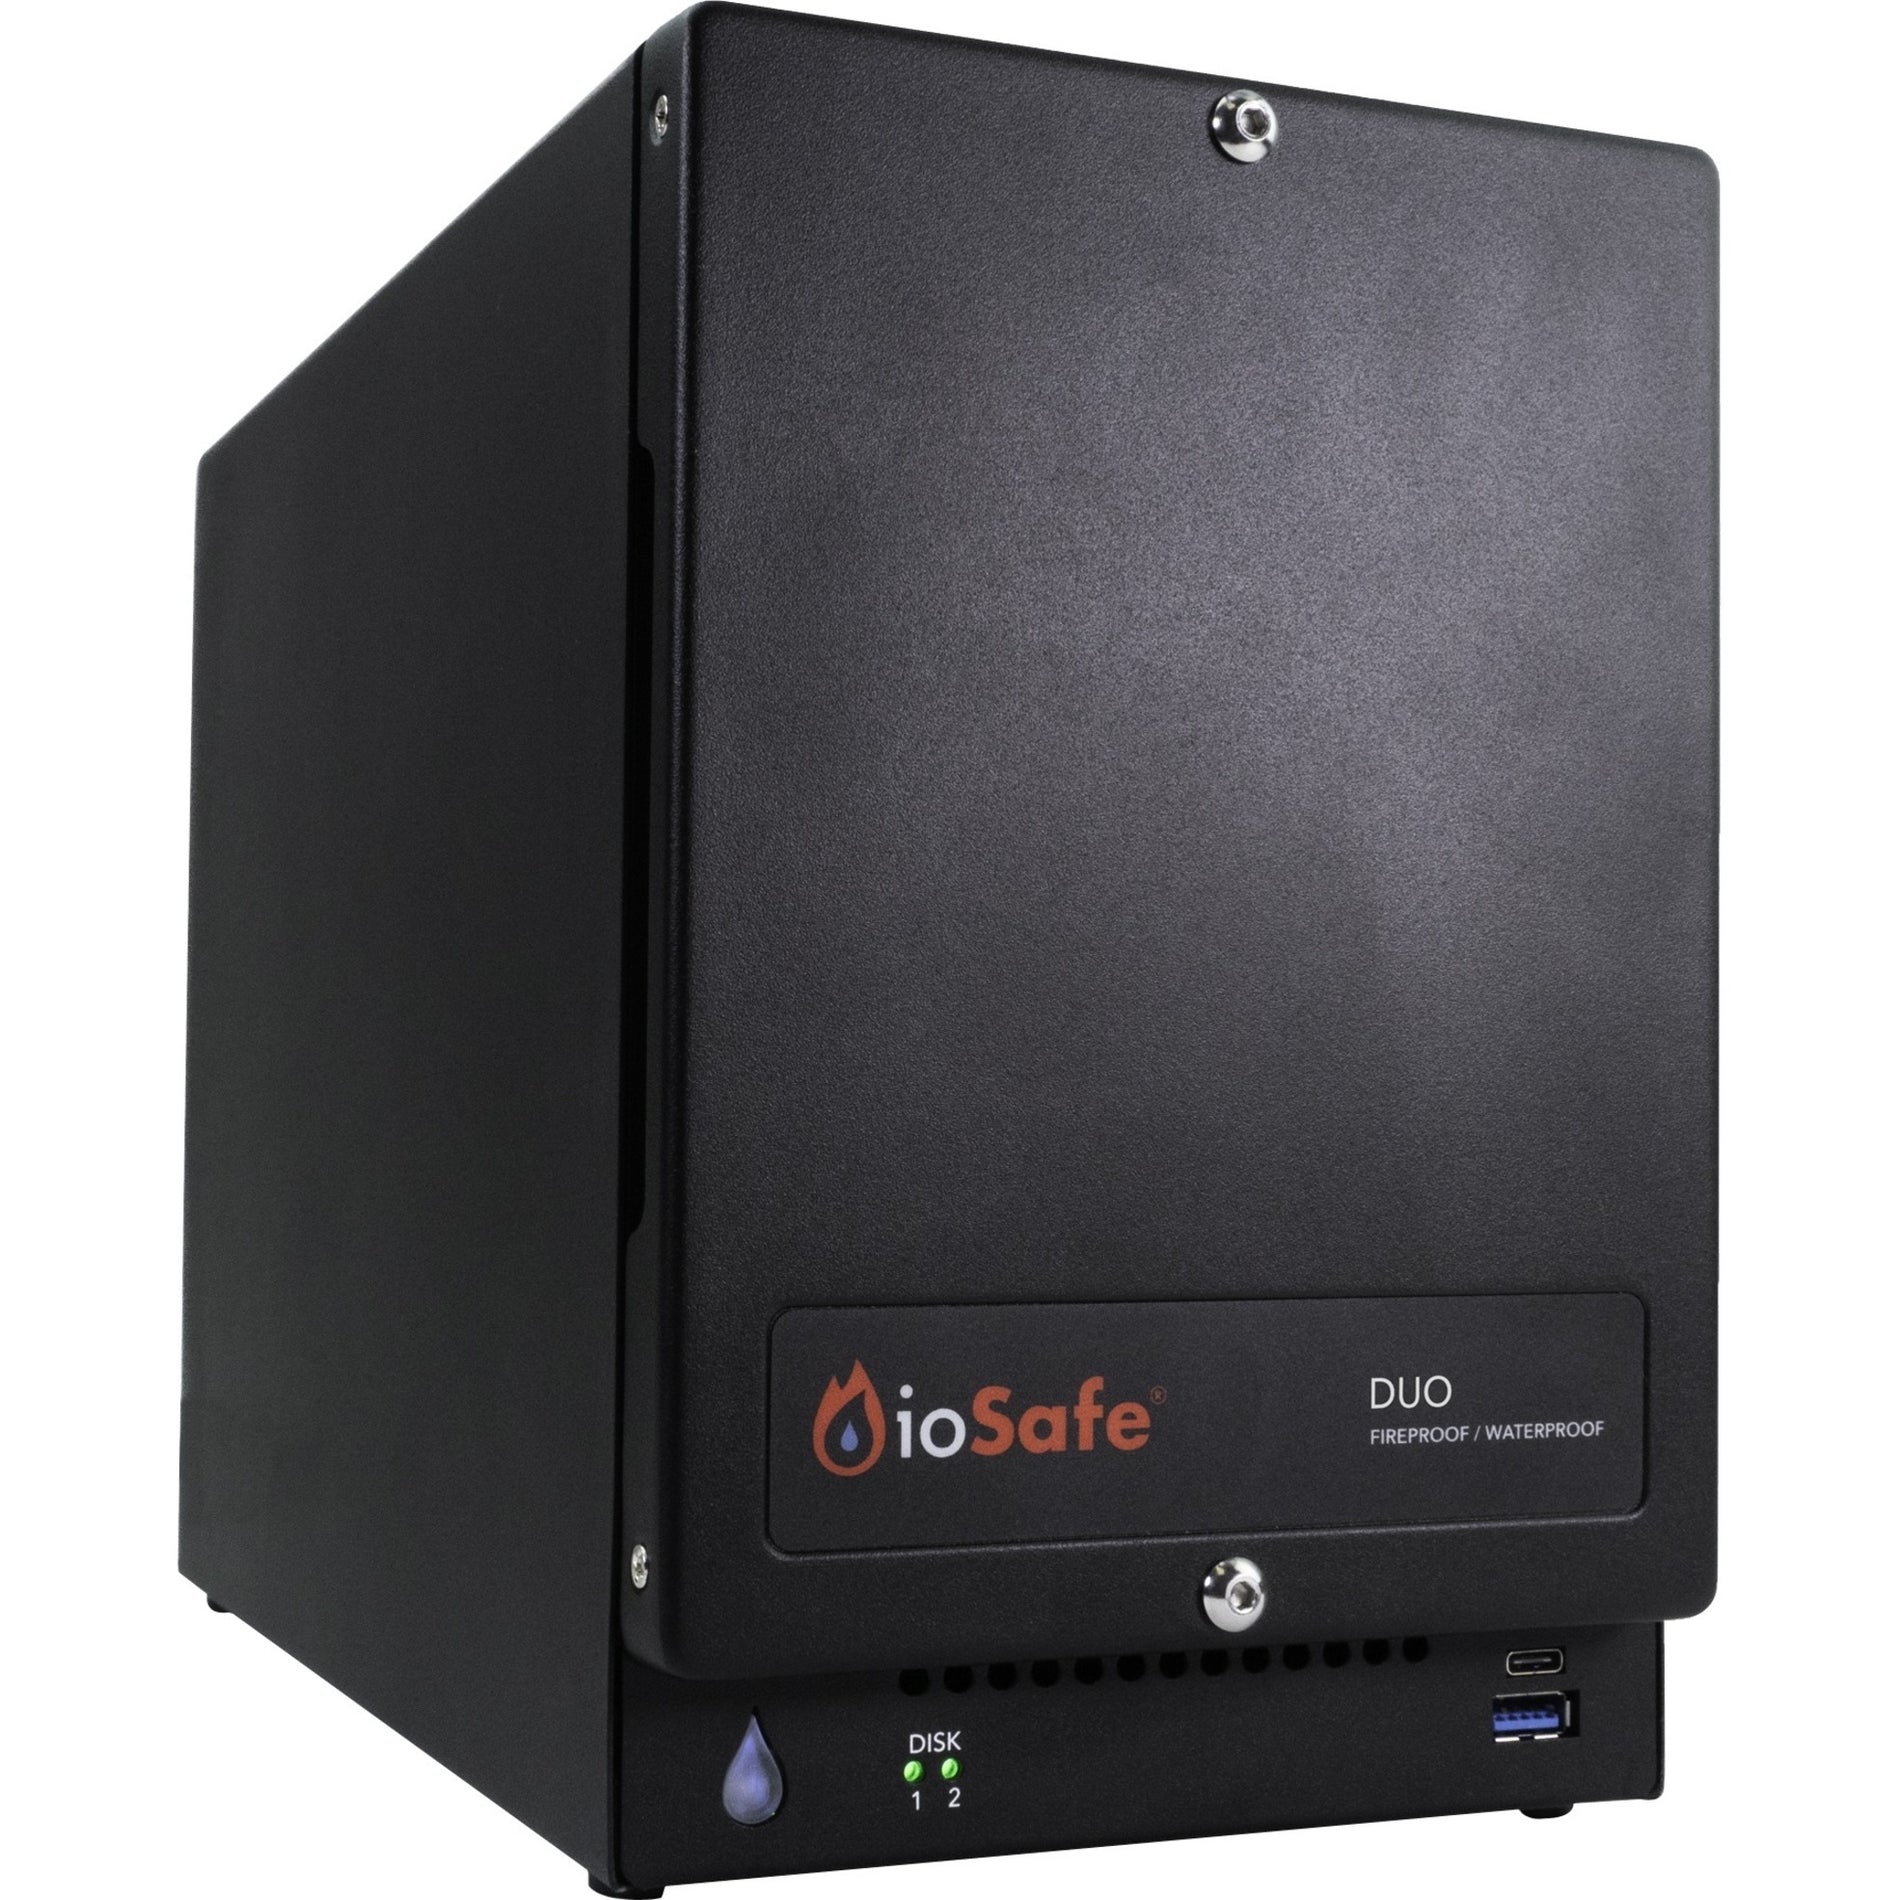 ioSafe Duo DAS Storage System - High Capacity and Reliable Data Storage [Discontinued]